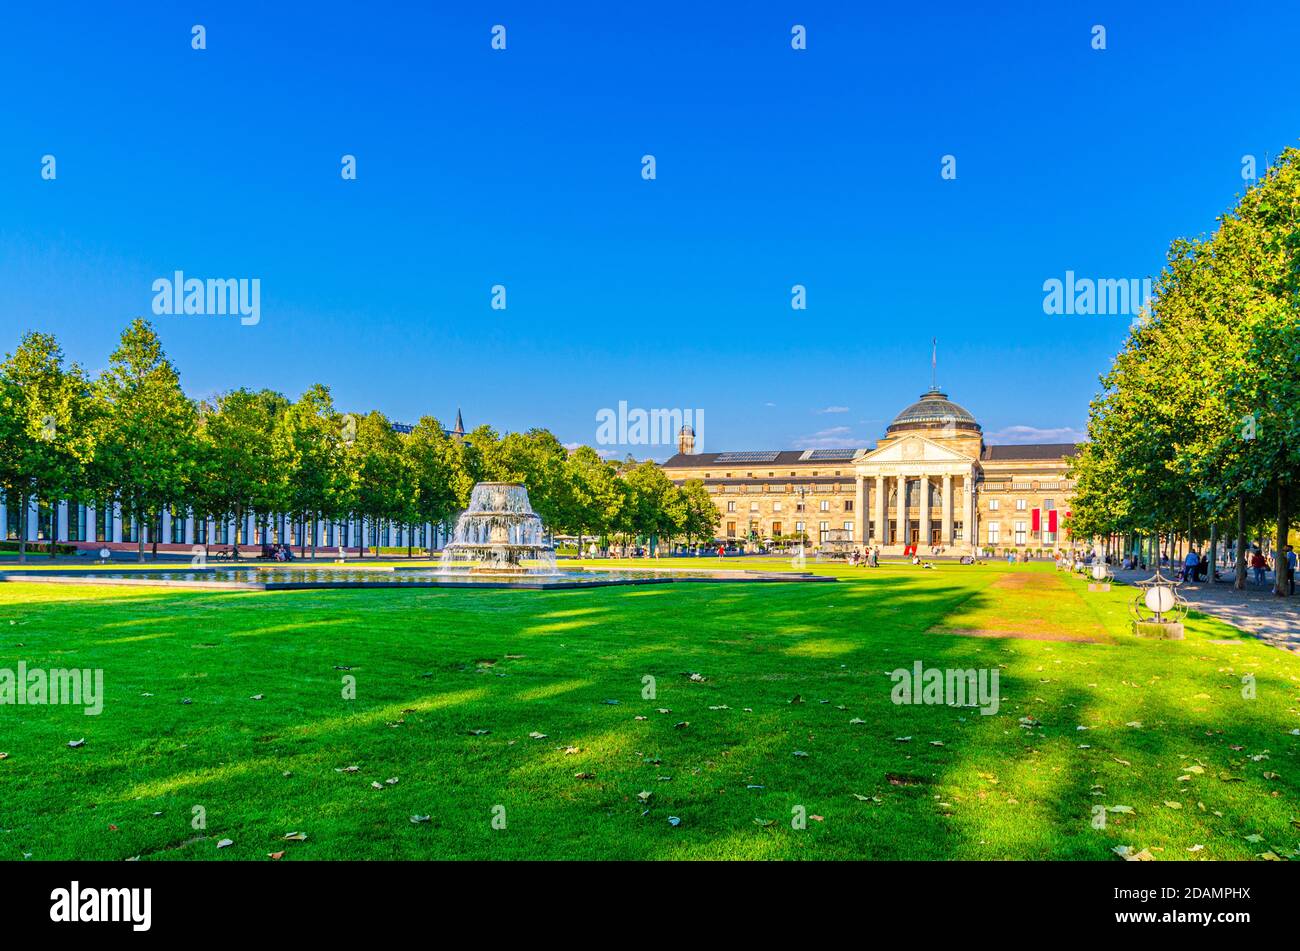 Wiesbaden, Germany, August 24, 2019: Kurhaus or cure house spa and casino building and Bowling Green park with grass lawn, trees alley and pond with fountain in historical city centre, State of Hesse Stock Photo